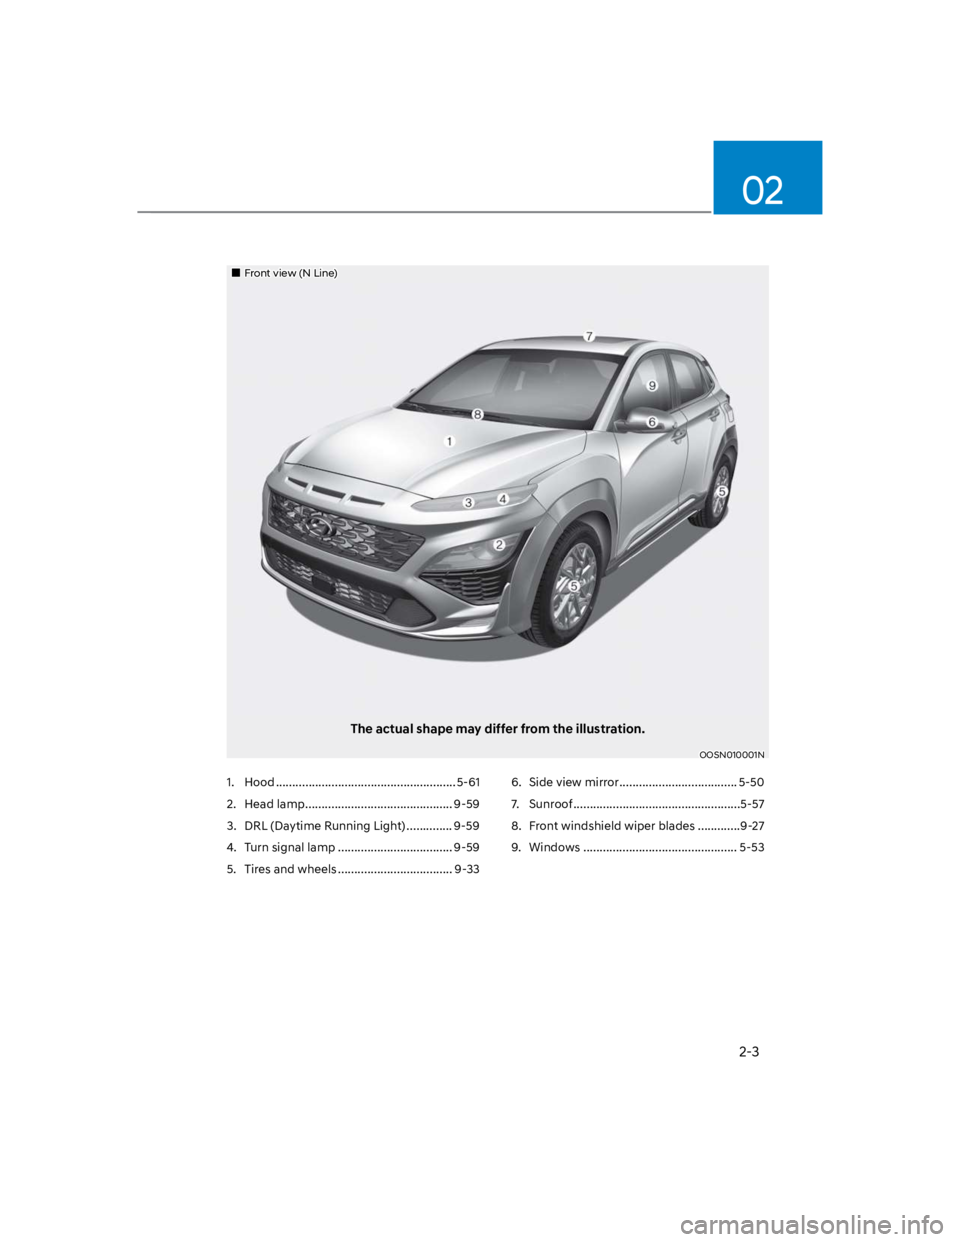 HYUNDAI KONA 2022 User Guide 2-3
02
Front view (N Line)
The actual shape may differ from the illustration.
OOSN010001N
1.  Hood ....................................................... 5-61
2.  Head lamp ..........................